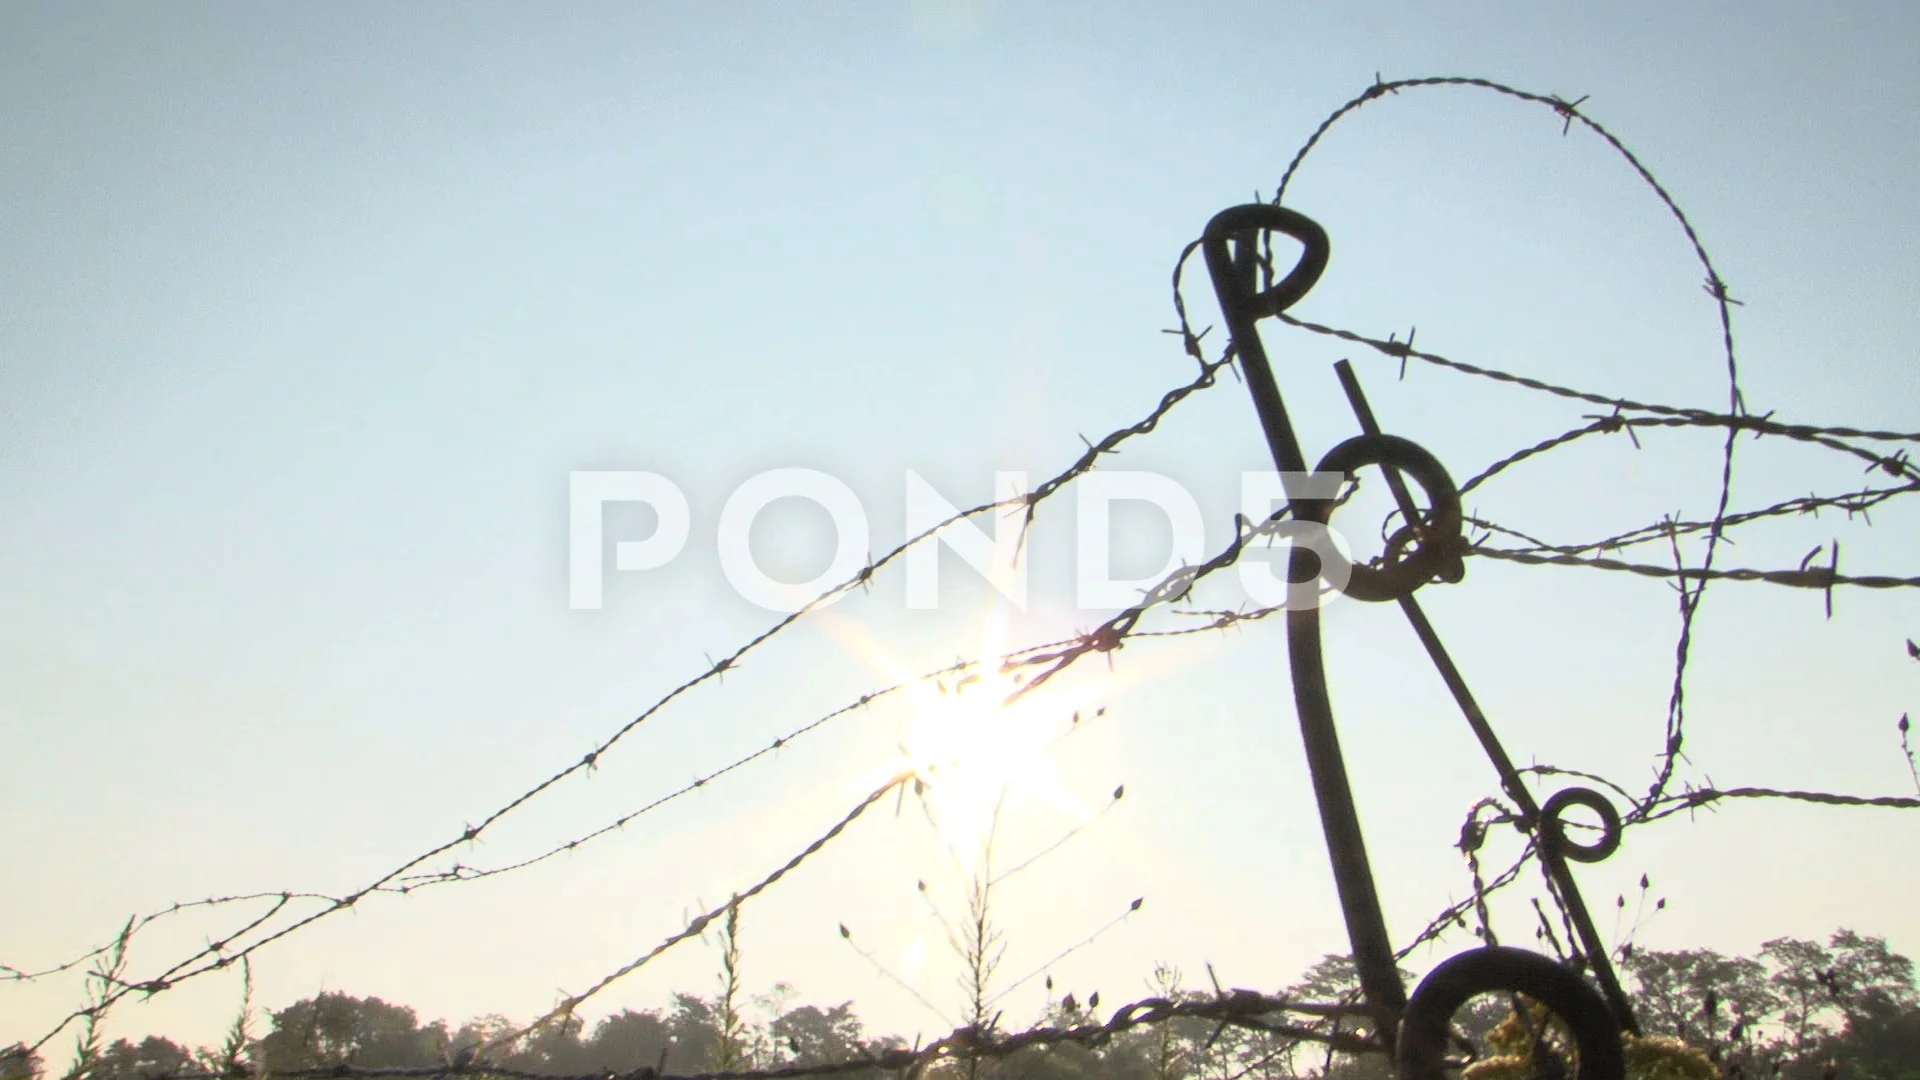 barbed wire ww1